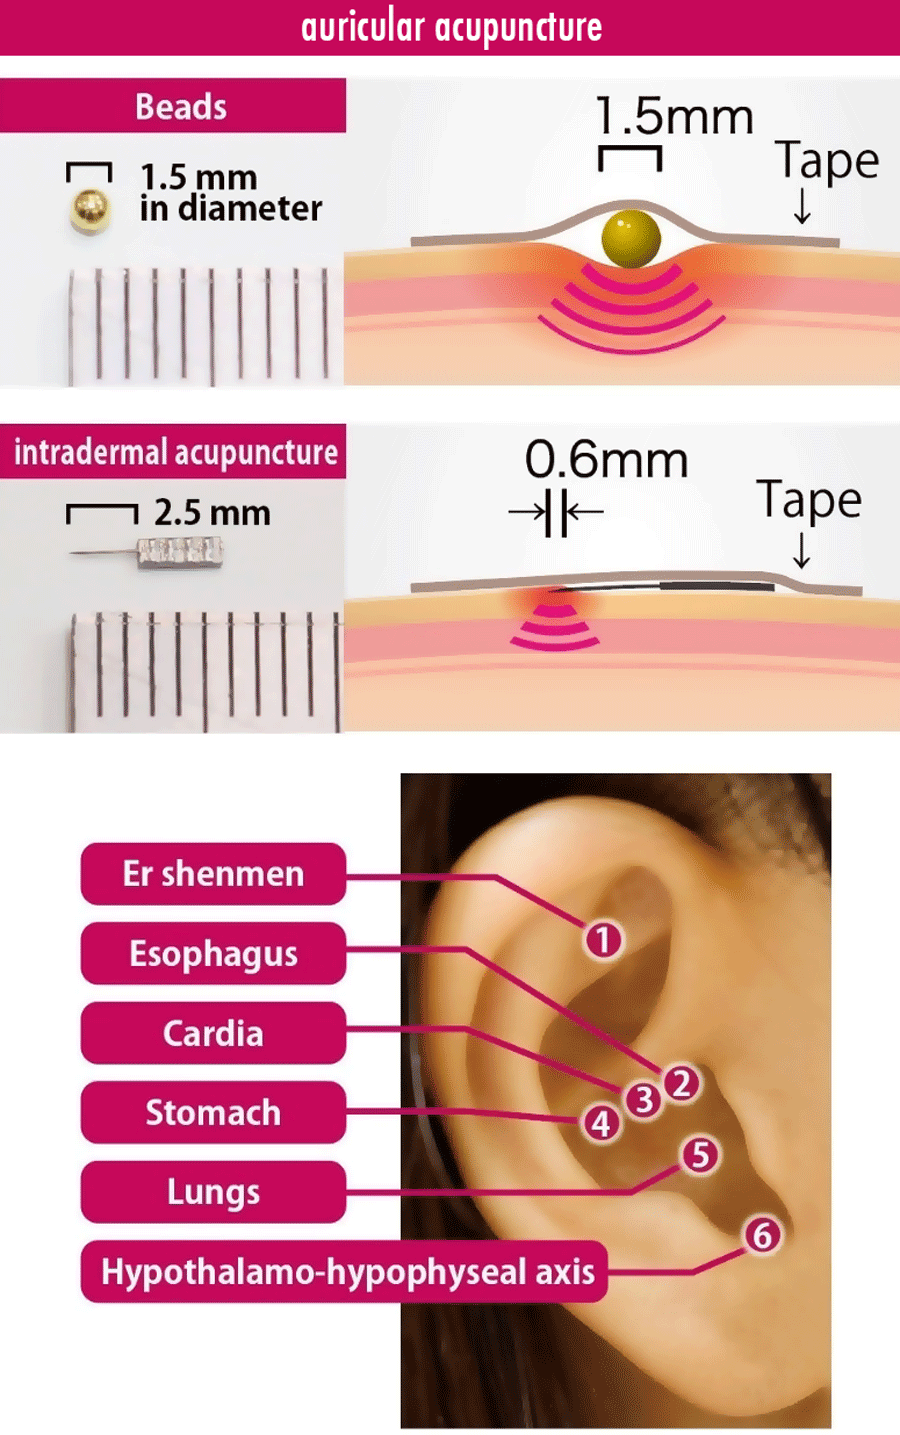 Ear Acupuncture Using Beads Could Help Boost Weight Loss Efforts